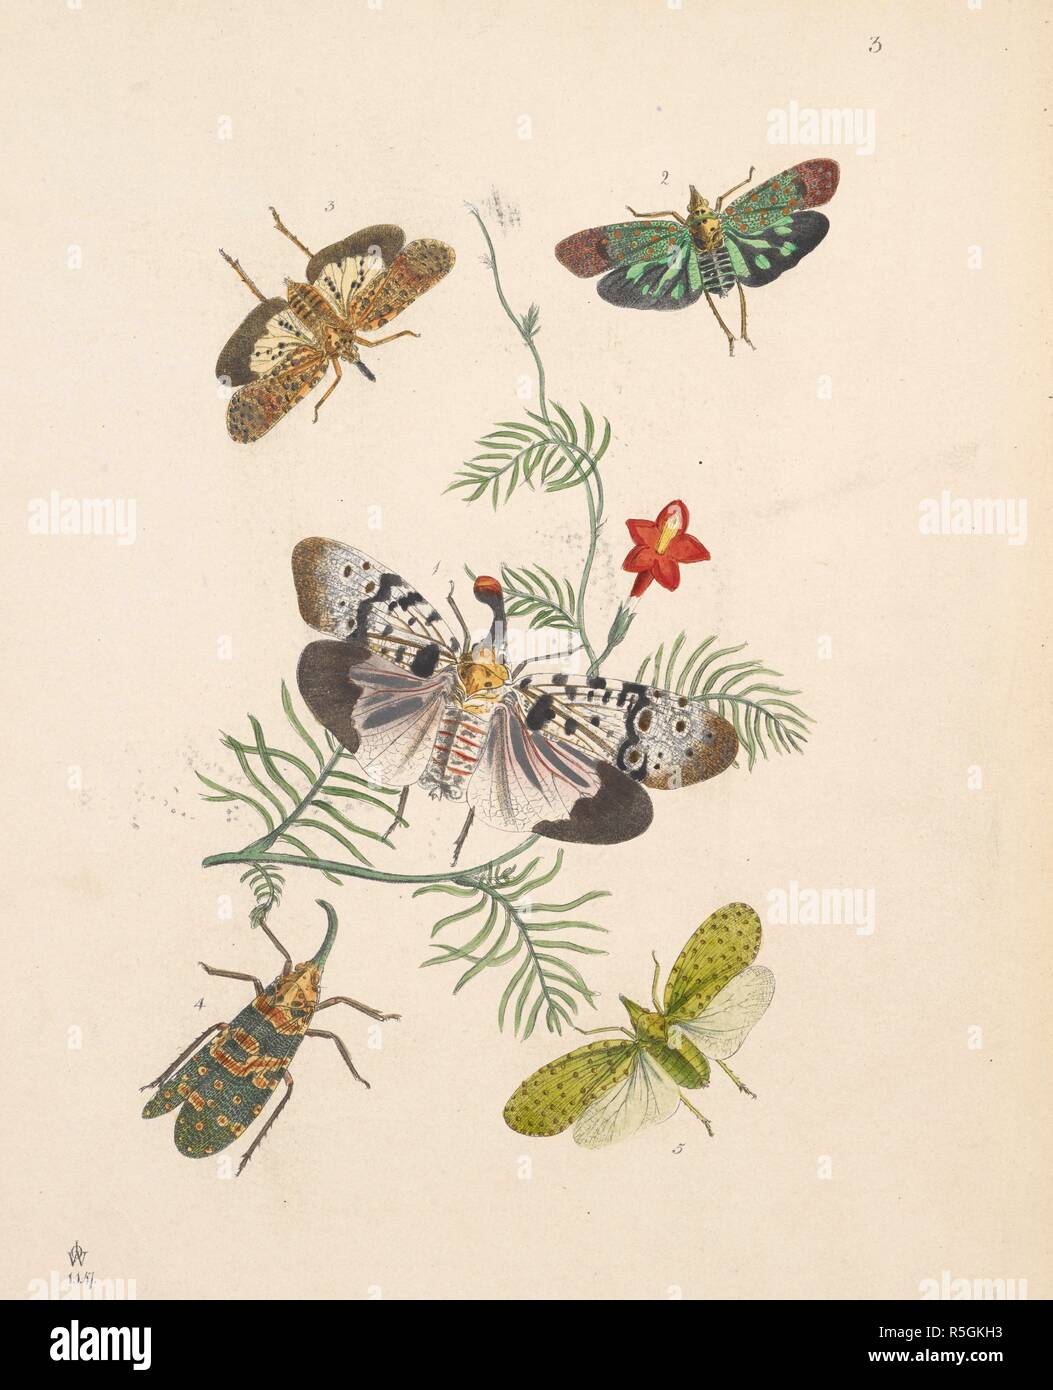 Various winged insects such as moths, butterflies, and aphids. (ORDERâ€” UOMOPTERA. Sectionâ€” Trimeka. Familyâ€” Fi'lgouidj:.â€” Leach.)  FIGURE 1. FULGORA (HOTINA) CLAVATA. Westw. FIGURE 2. FULGORA (HOTINA) GEMMATA, Westw.  . The Cabinet of Oriental Entomology; being a selection of some of the rarer and more beautiful species of Insects, natives of India and the adjacent islands. London, 1848. Source: 1258.k.17 plate 3. Author: Westwood, John Obediah. Stock Photo